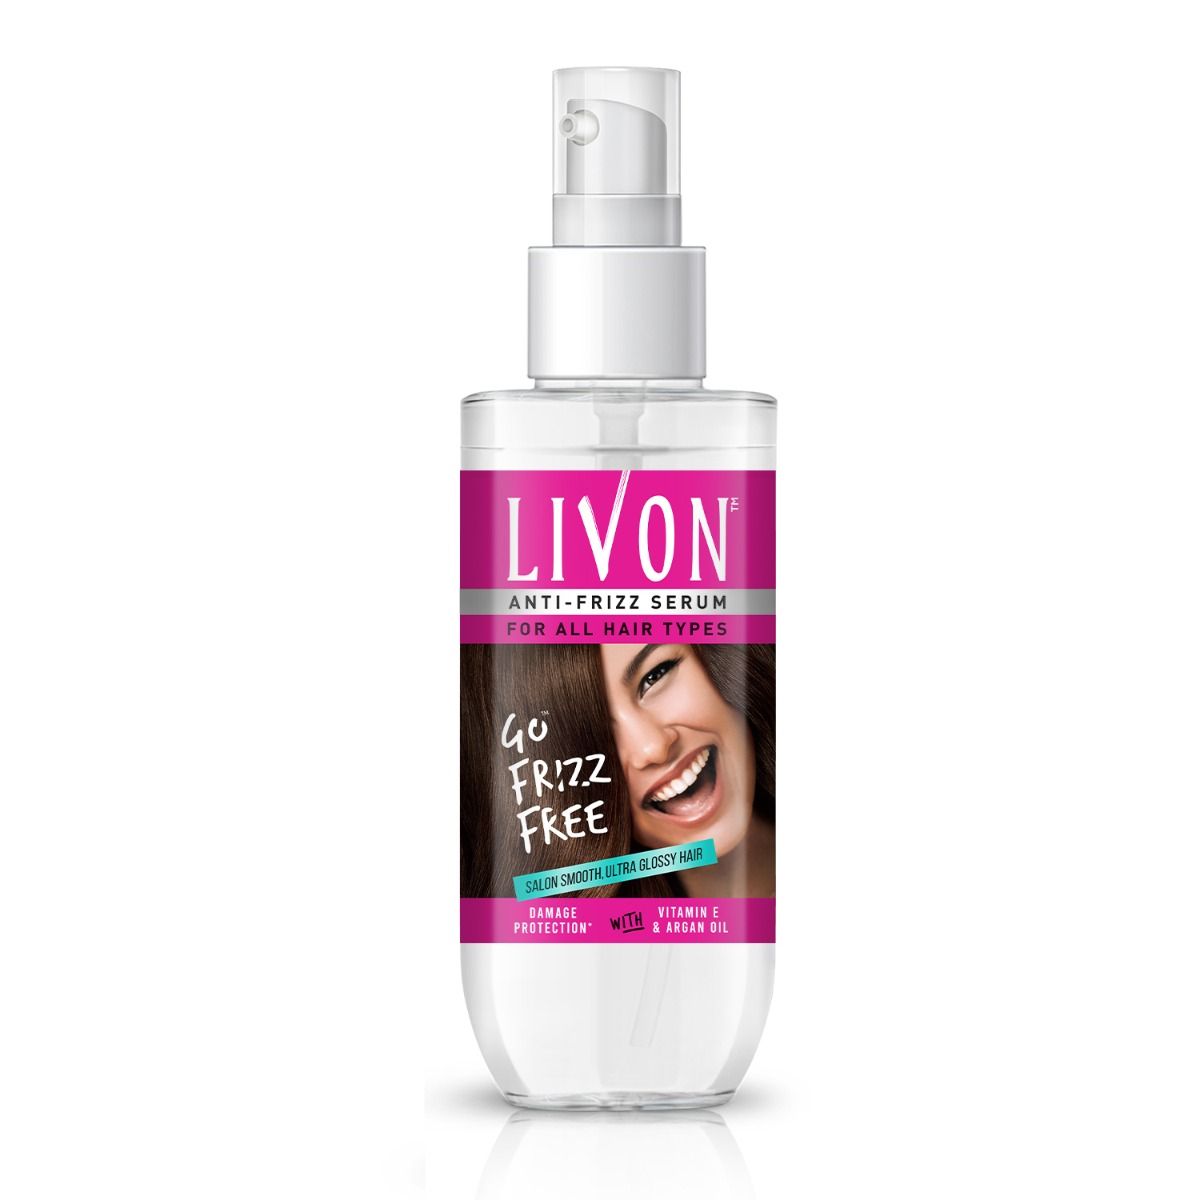 Livon Anti-Frizz Serum For All Hair Types, 20ml Price, Uses, Side Effects,  Composition - Apollo Pharmacy